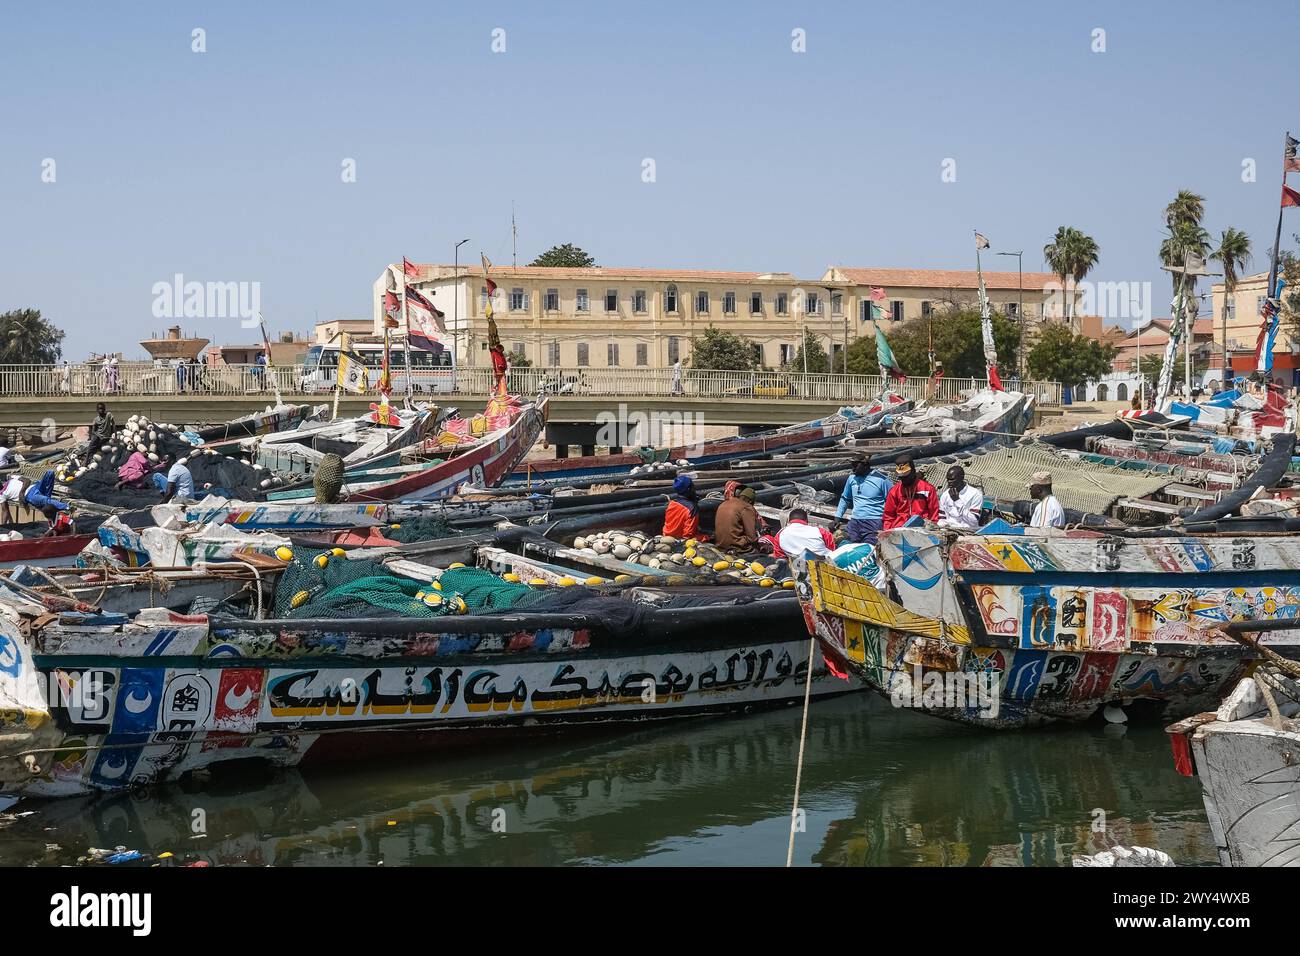 Nicolas Remene / Le Pictorium -  The Guet Ndar district in Saint-Louis, Senegal -  31/03/2024  -  Senegal / Saint-Louis / Saint-Louis  -  Fishing boats, one of the main economic activities in Saint-Louis, Senegal, on March 31, 2024.                                                                 Quet Ndar is a fishing district in Saint-Louis, Senegal, also known for having one of the highest population densities in the world. It is located on the Langue de Barbarie, which has been facing coastal erosion for years. Today, the district is threatened by the heavy swell that has battered its shore Stock Photo